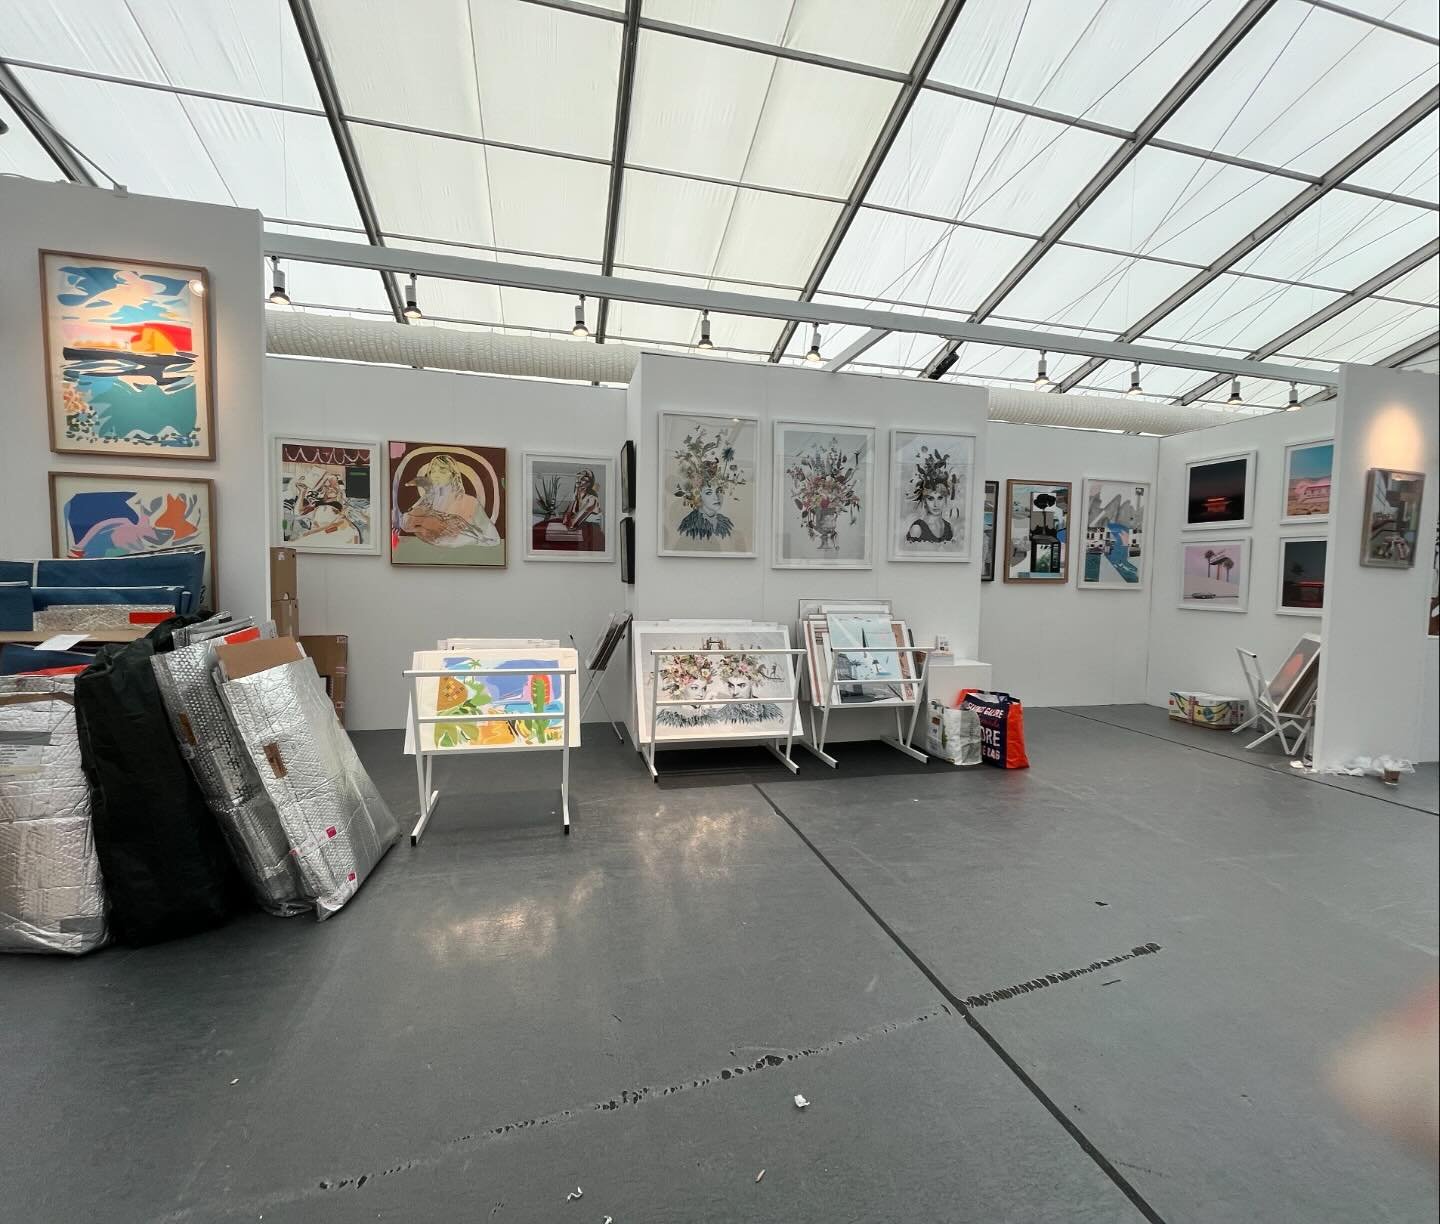 This evening &hellip;.. almost there! Lots of tidying, labelling and a few more pieces to hang but we&rsquo;re getting there (I do love my storage area though 😂) Just brilliant to see all the new art &lsquo;in the flesh&rsquo; and really connect wit